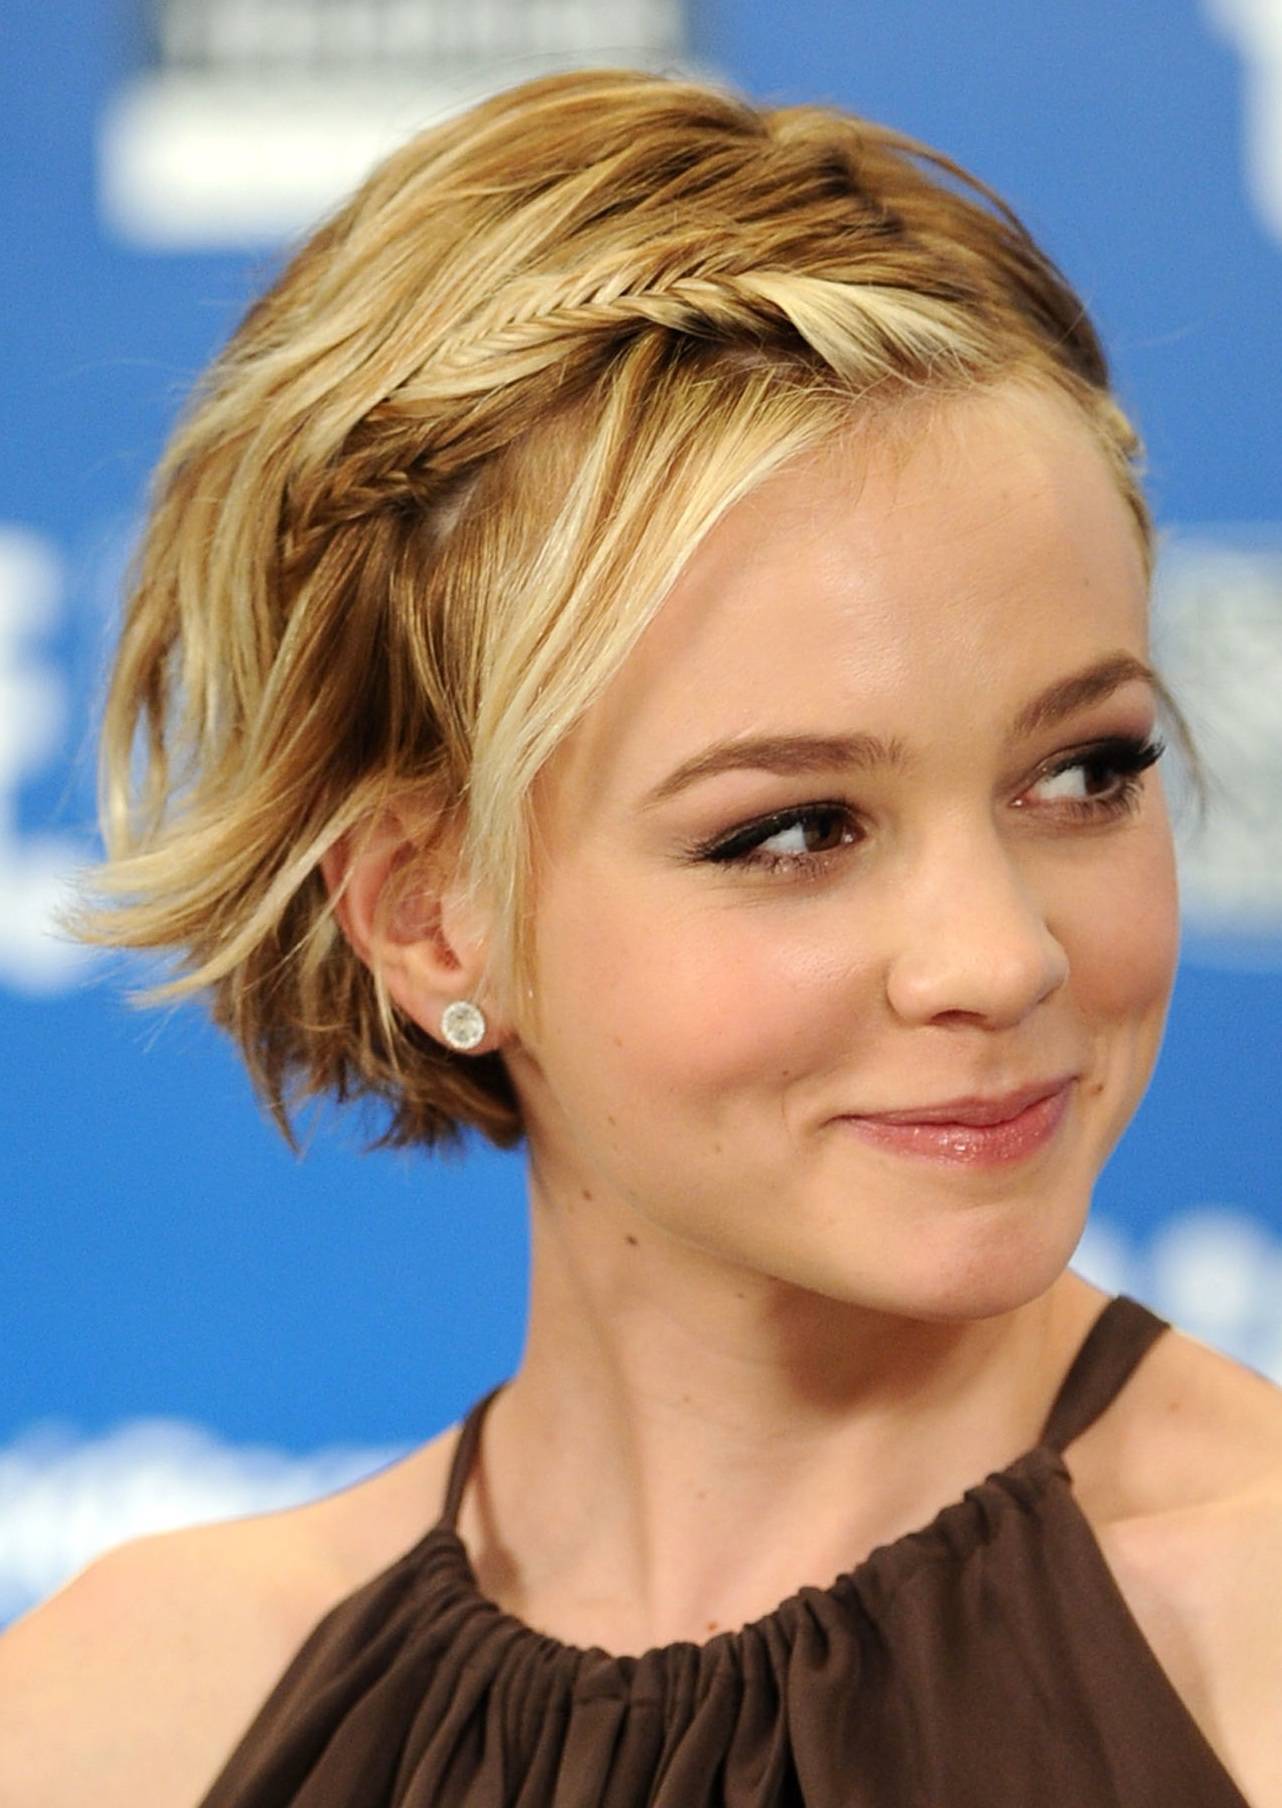 21 Short Hairstyles For Round Faces Styles Weekly